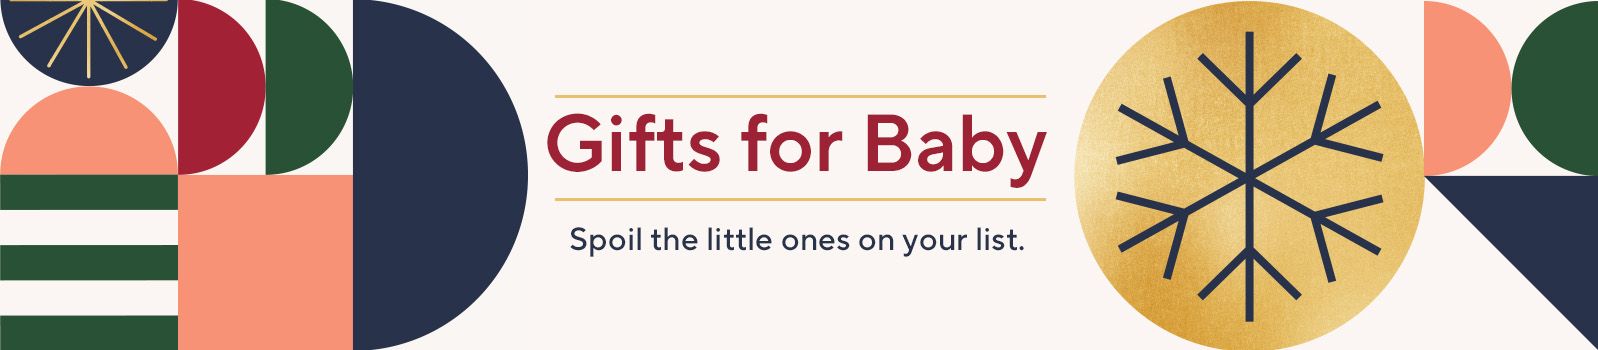 Gifts for Baby - Spoil the little ones on your list. 